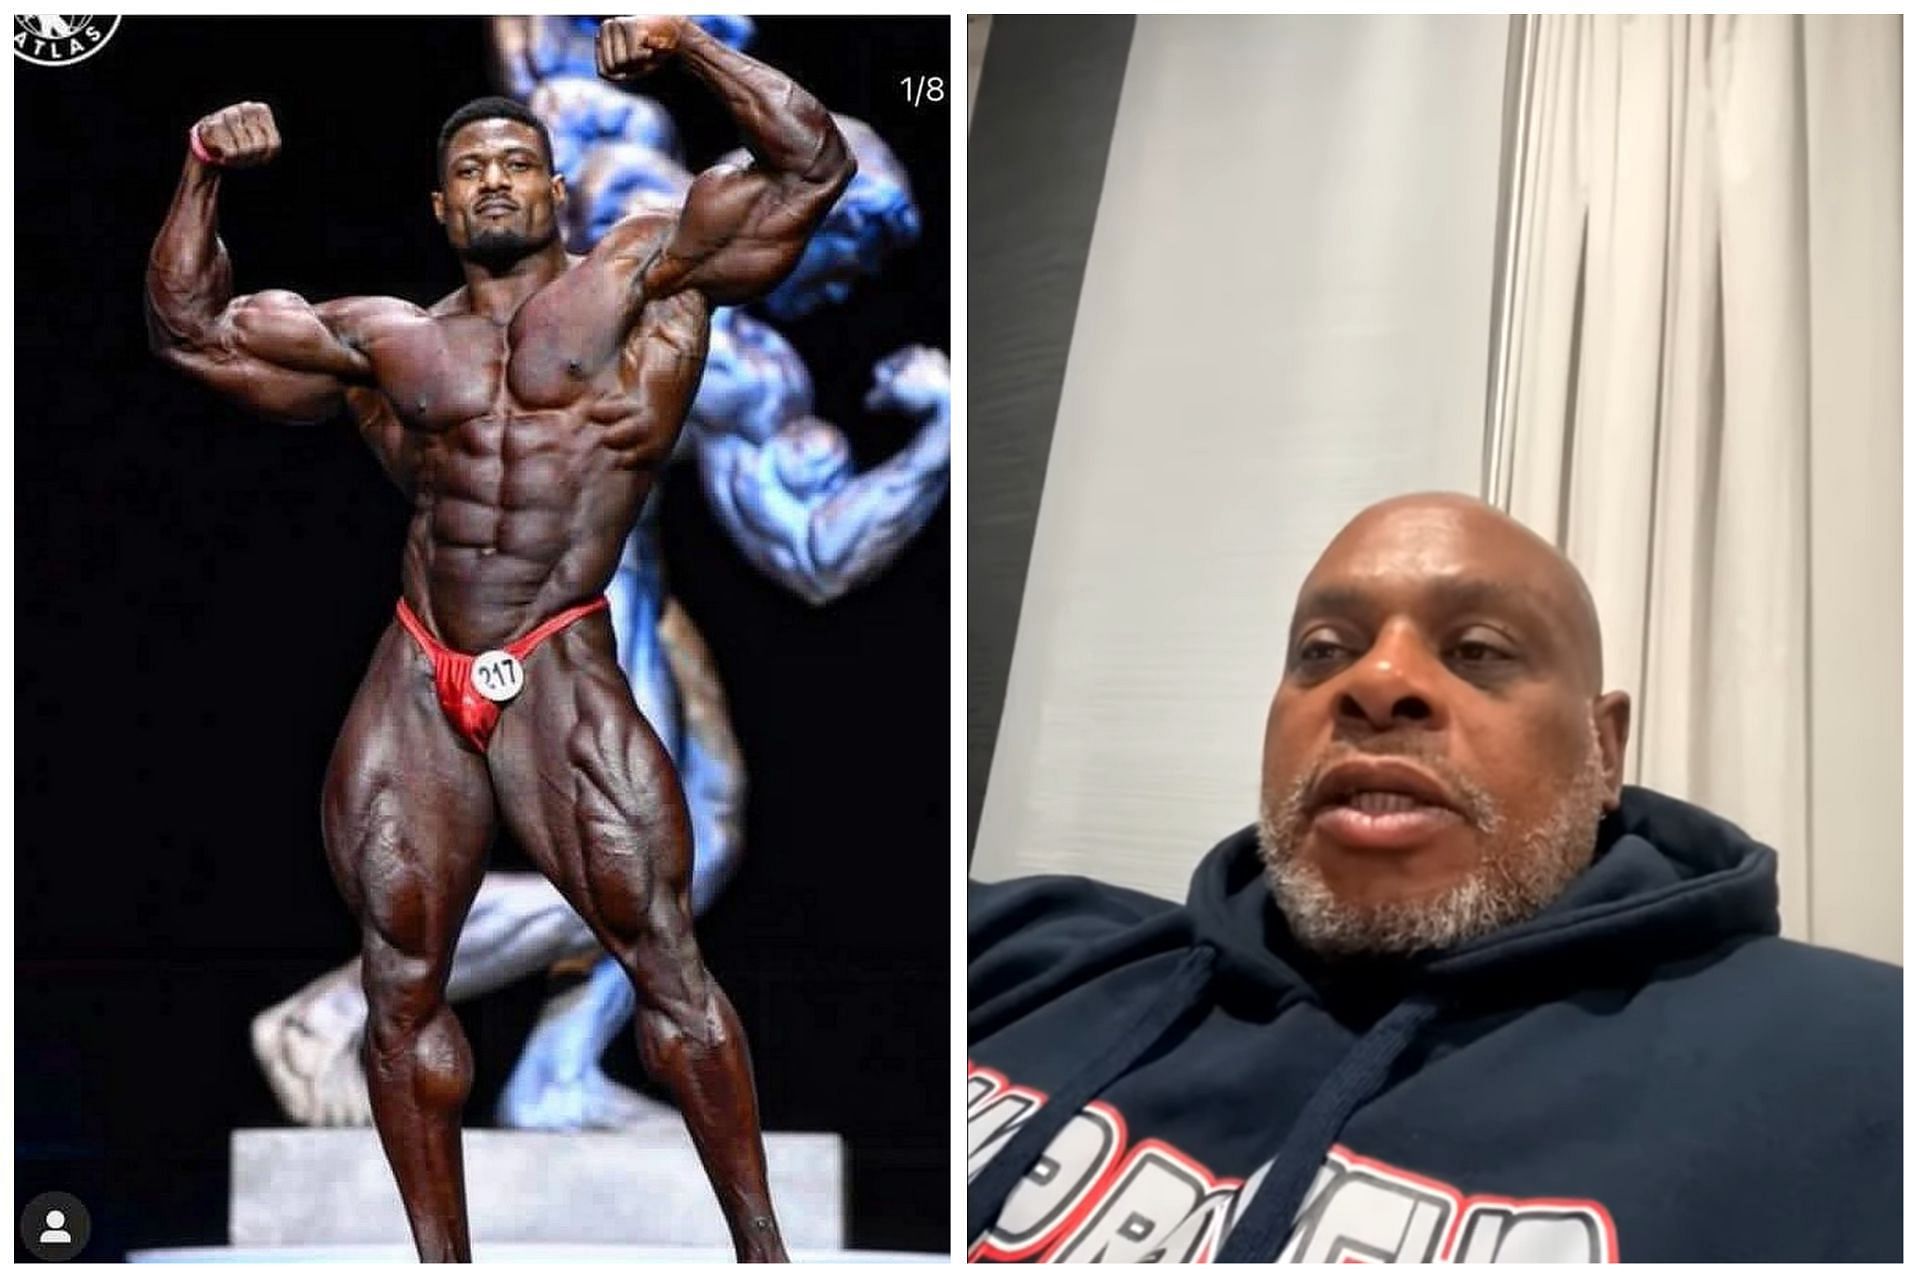 Chris Lewis discusses Andrew Jacked